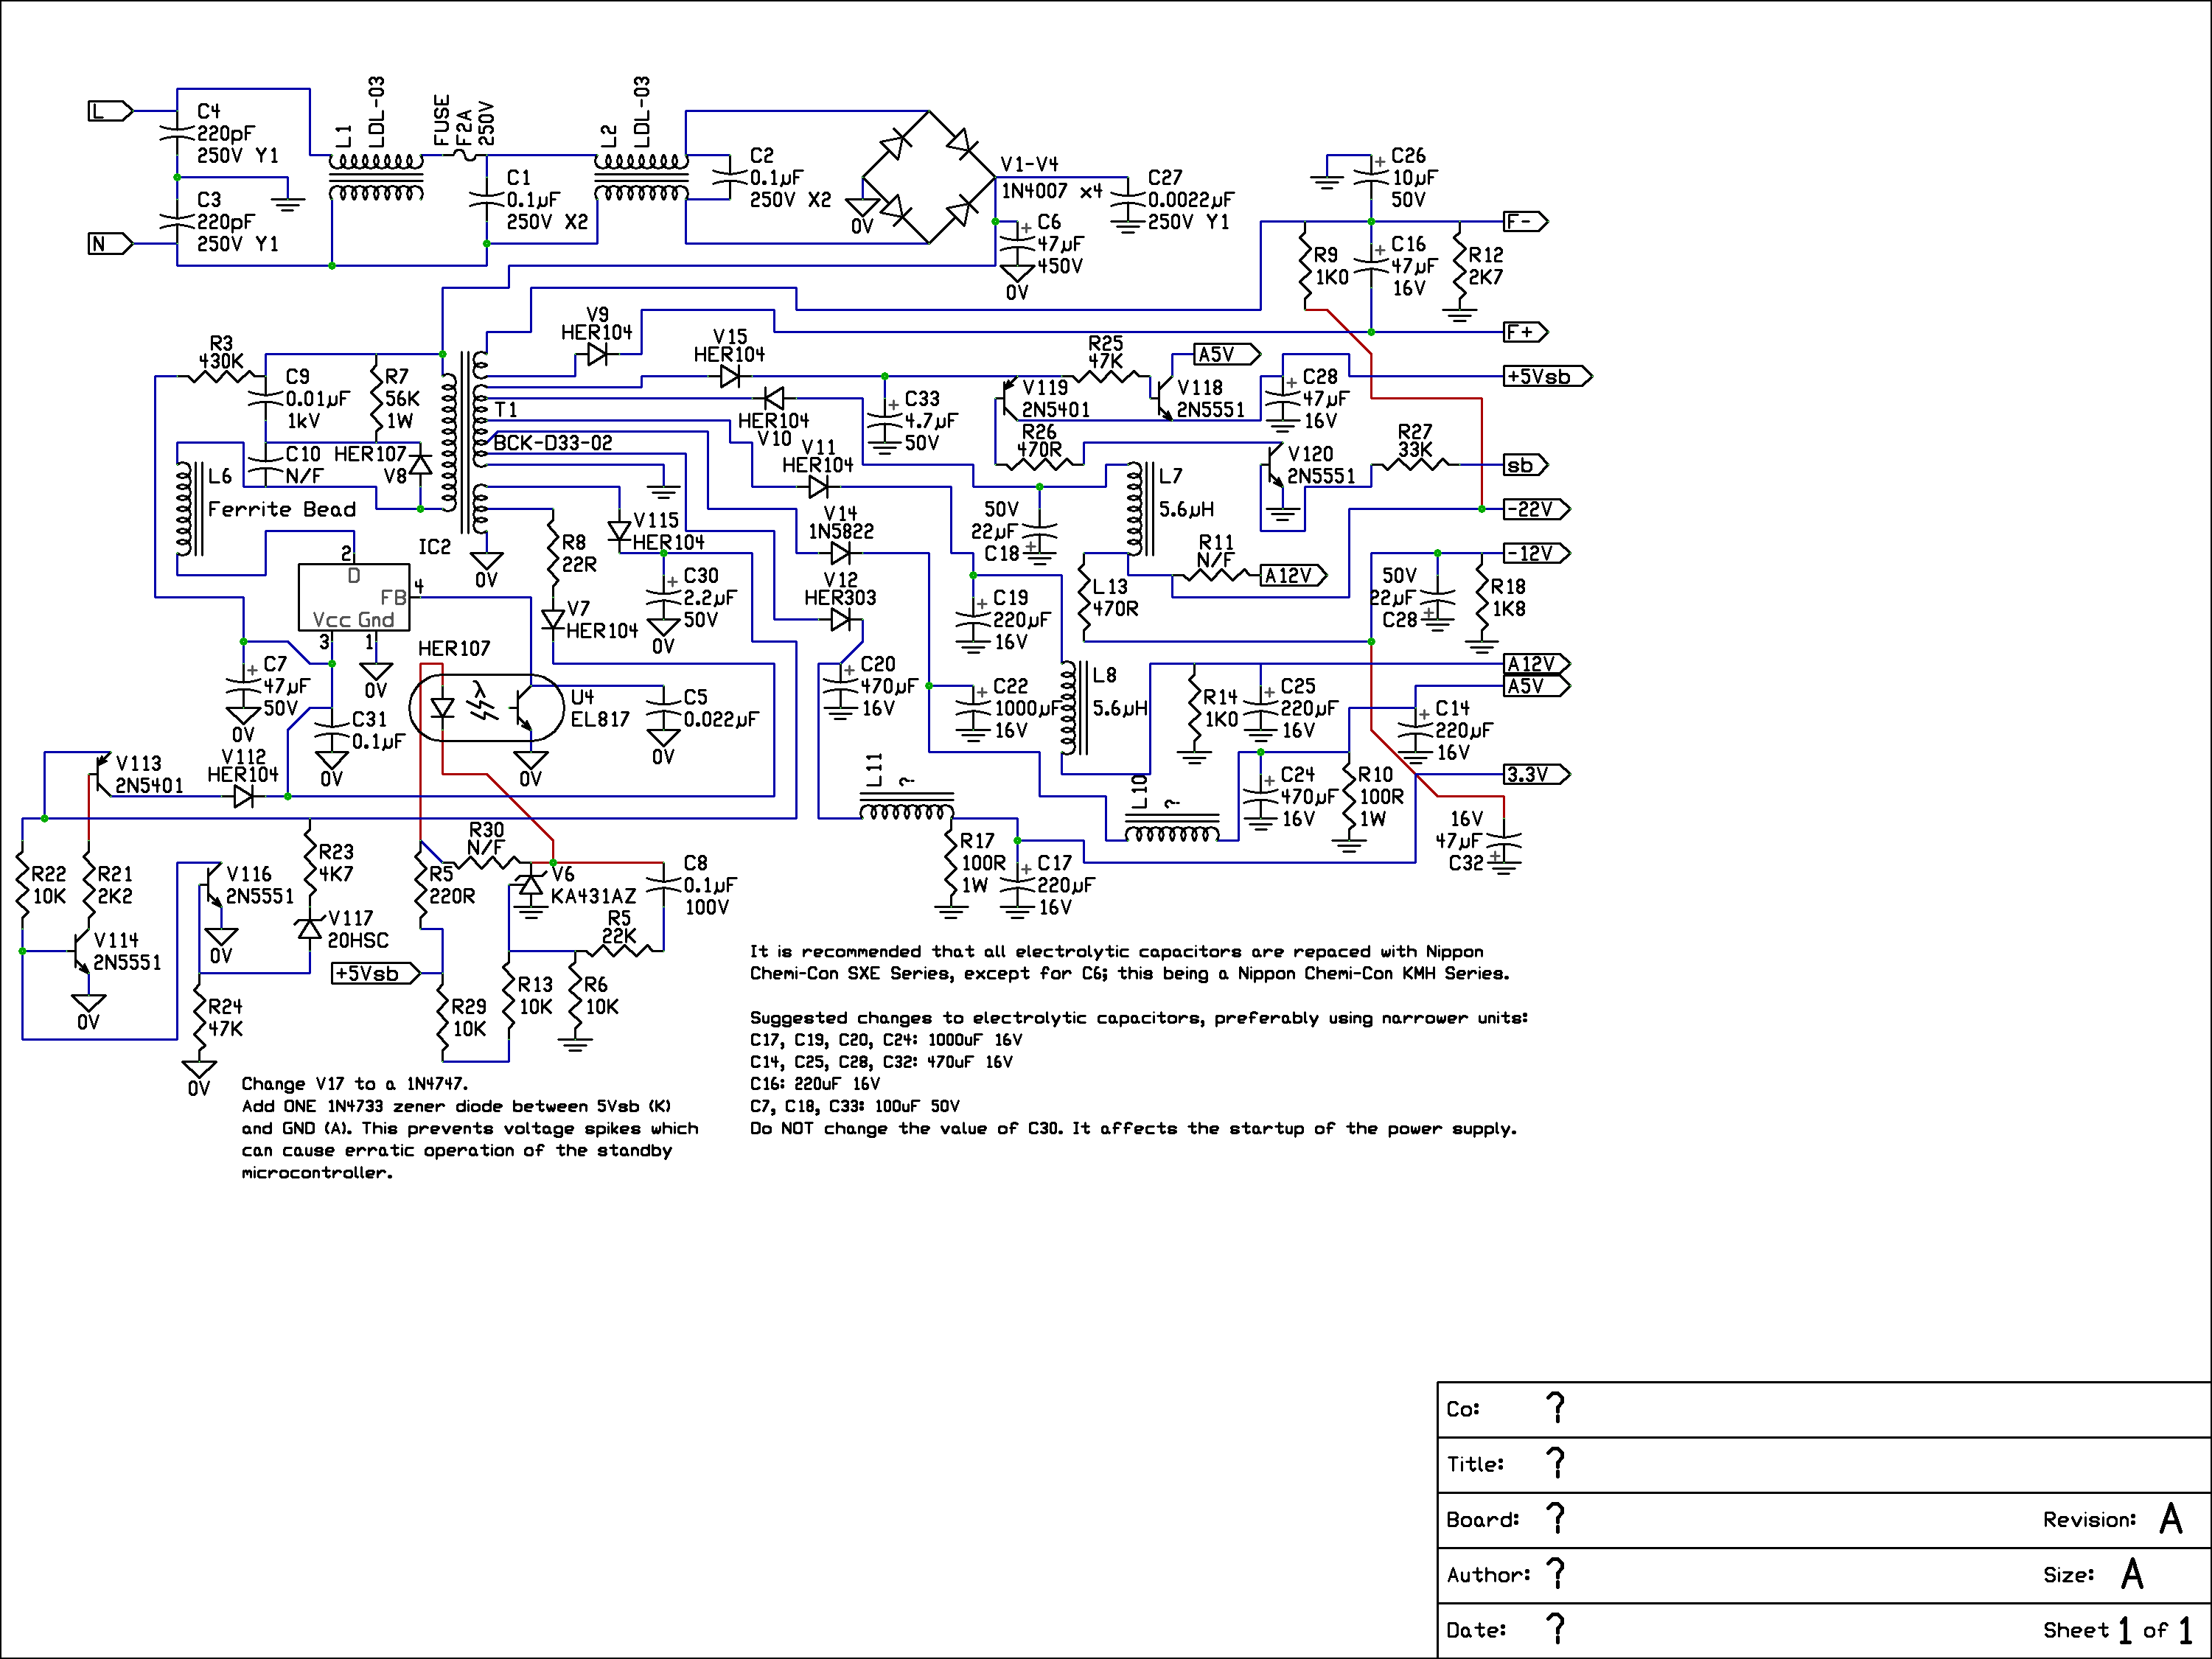 Centrex CTD-2100 Circuit diagram for Centrex CTD-2100 DVD Player (with improvements)